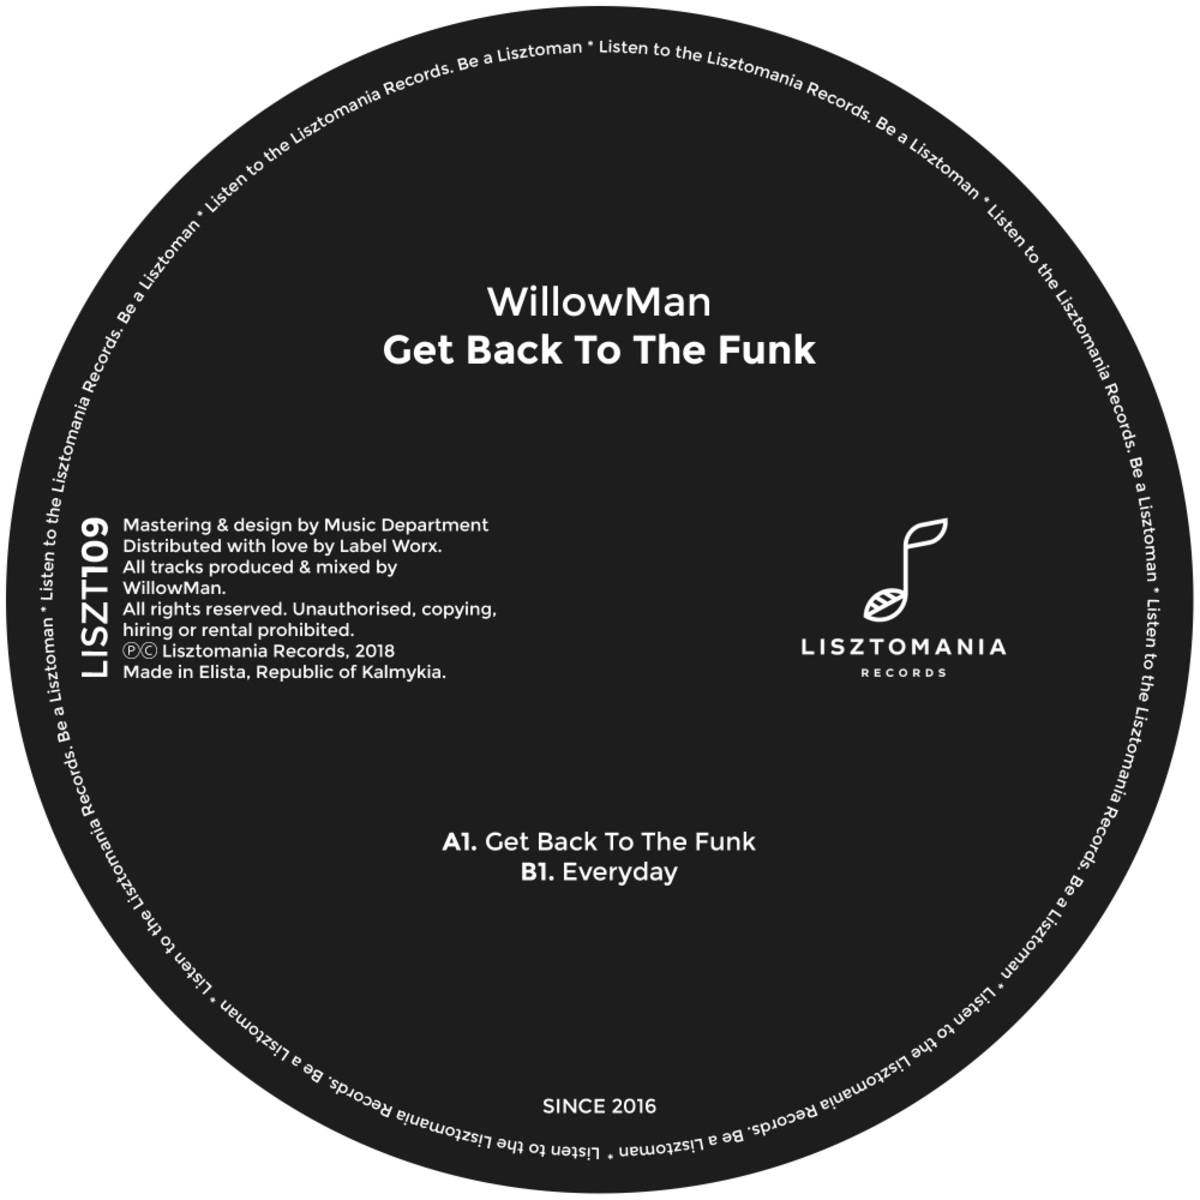 WillowMan - Get Back To The Funk / Lisztomania Records